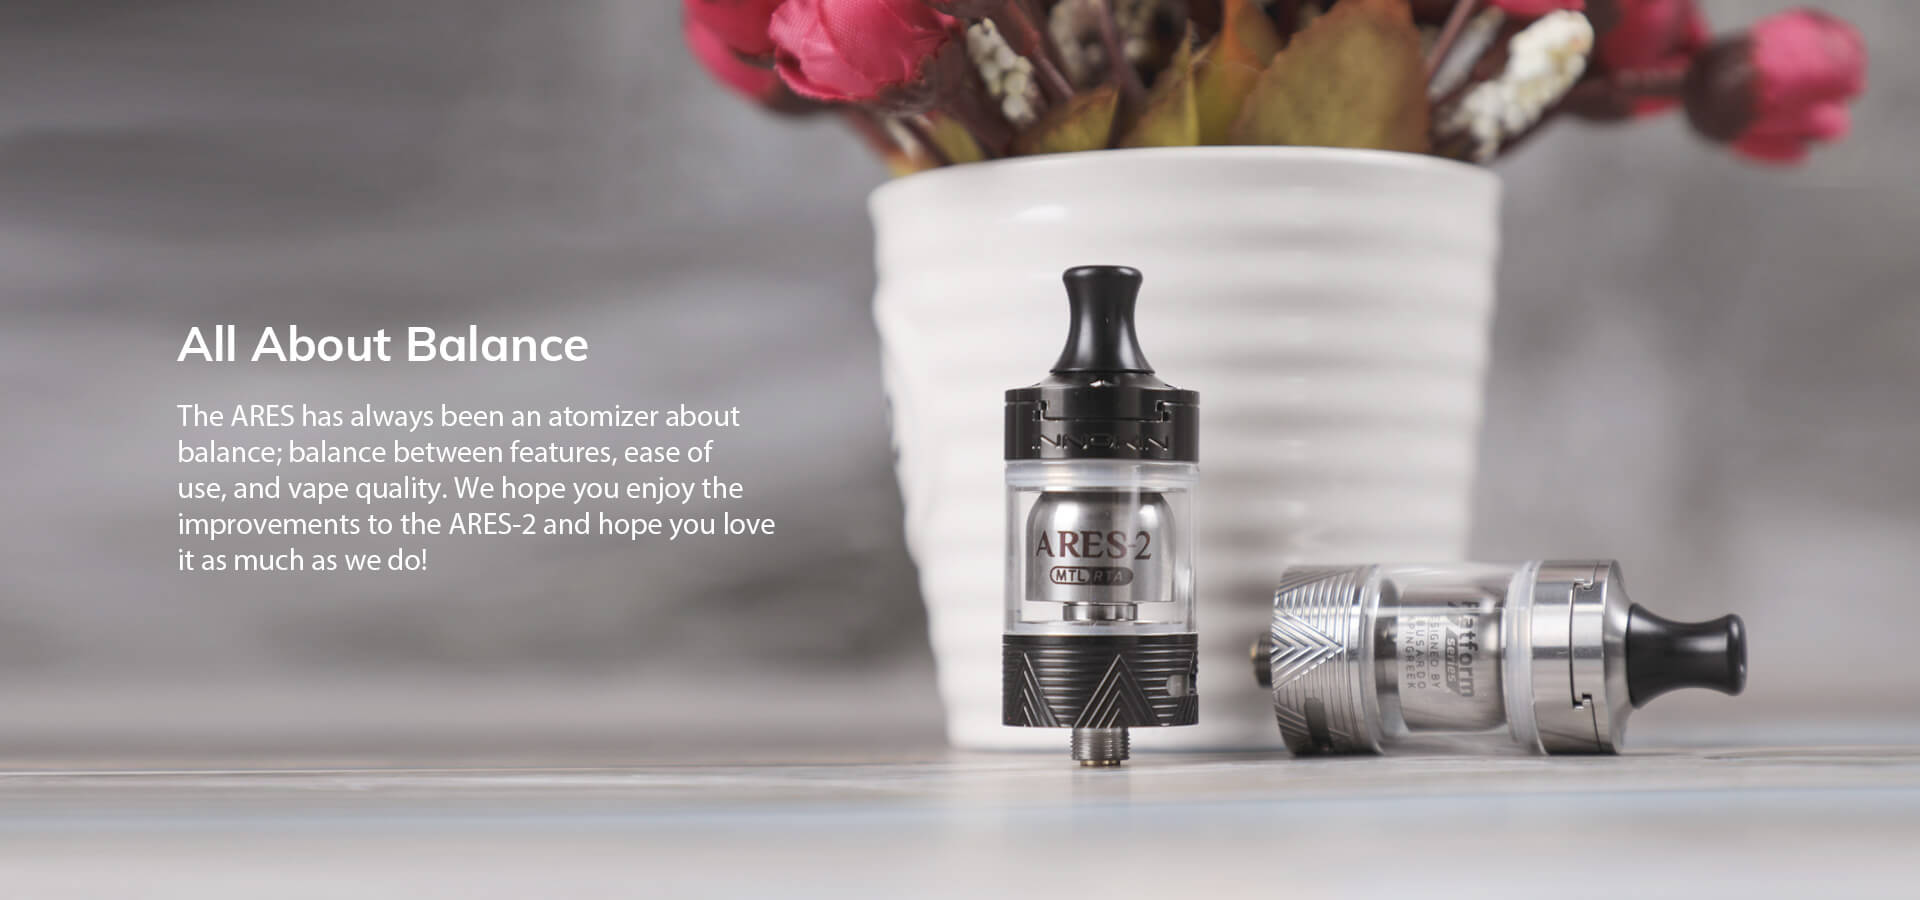 Ares 2 limited. Innokin ares 2 MTL. Ares v2 MTL RTA. Ares 2 MTL RTA. Ares 2 d24 MTL RTA.